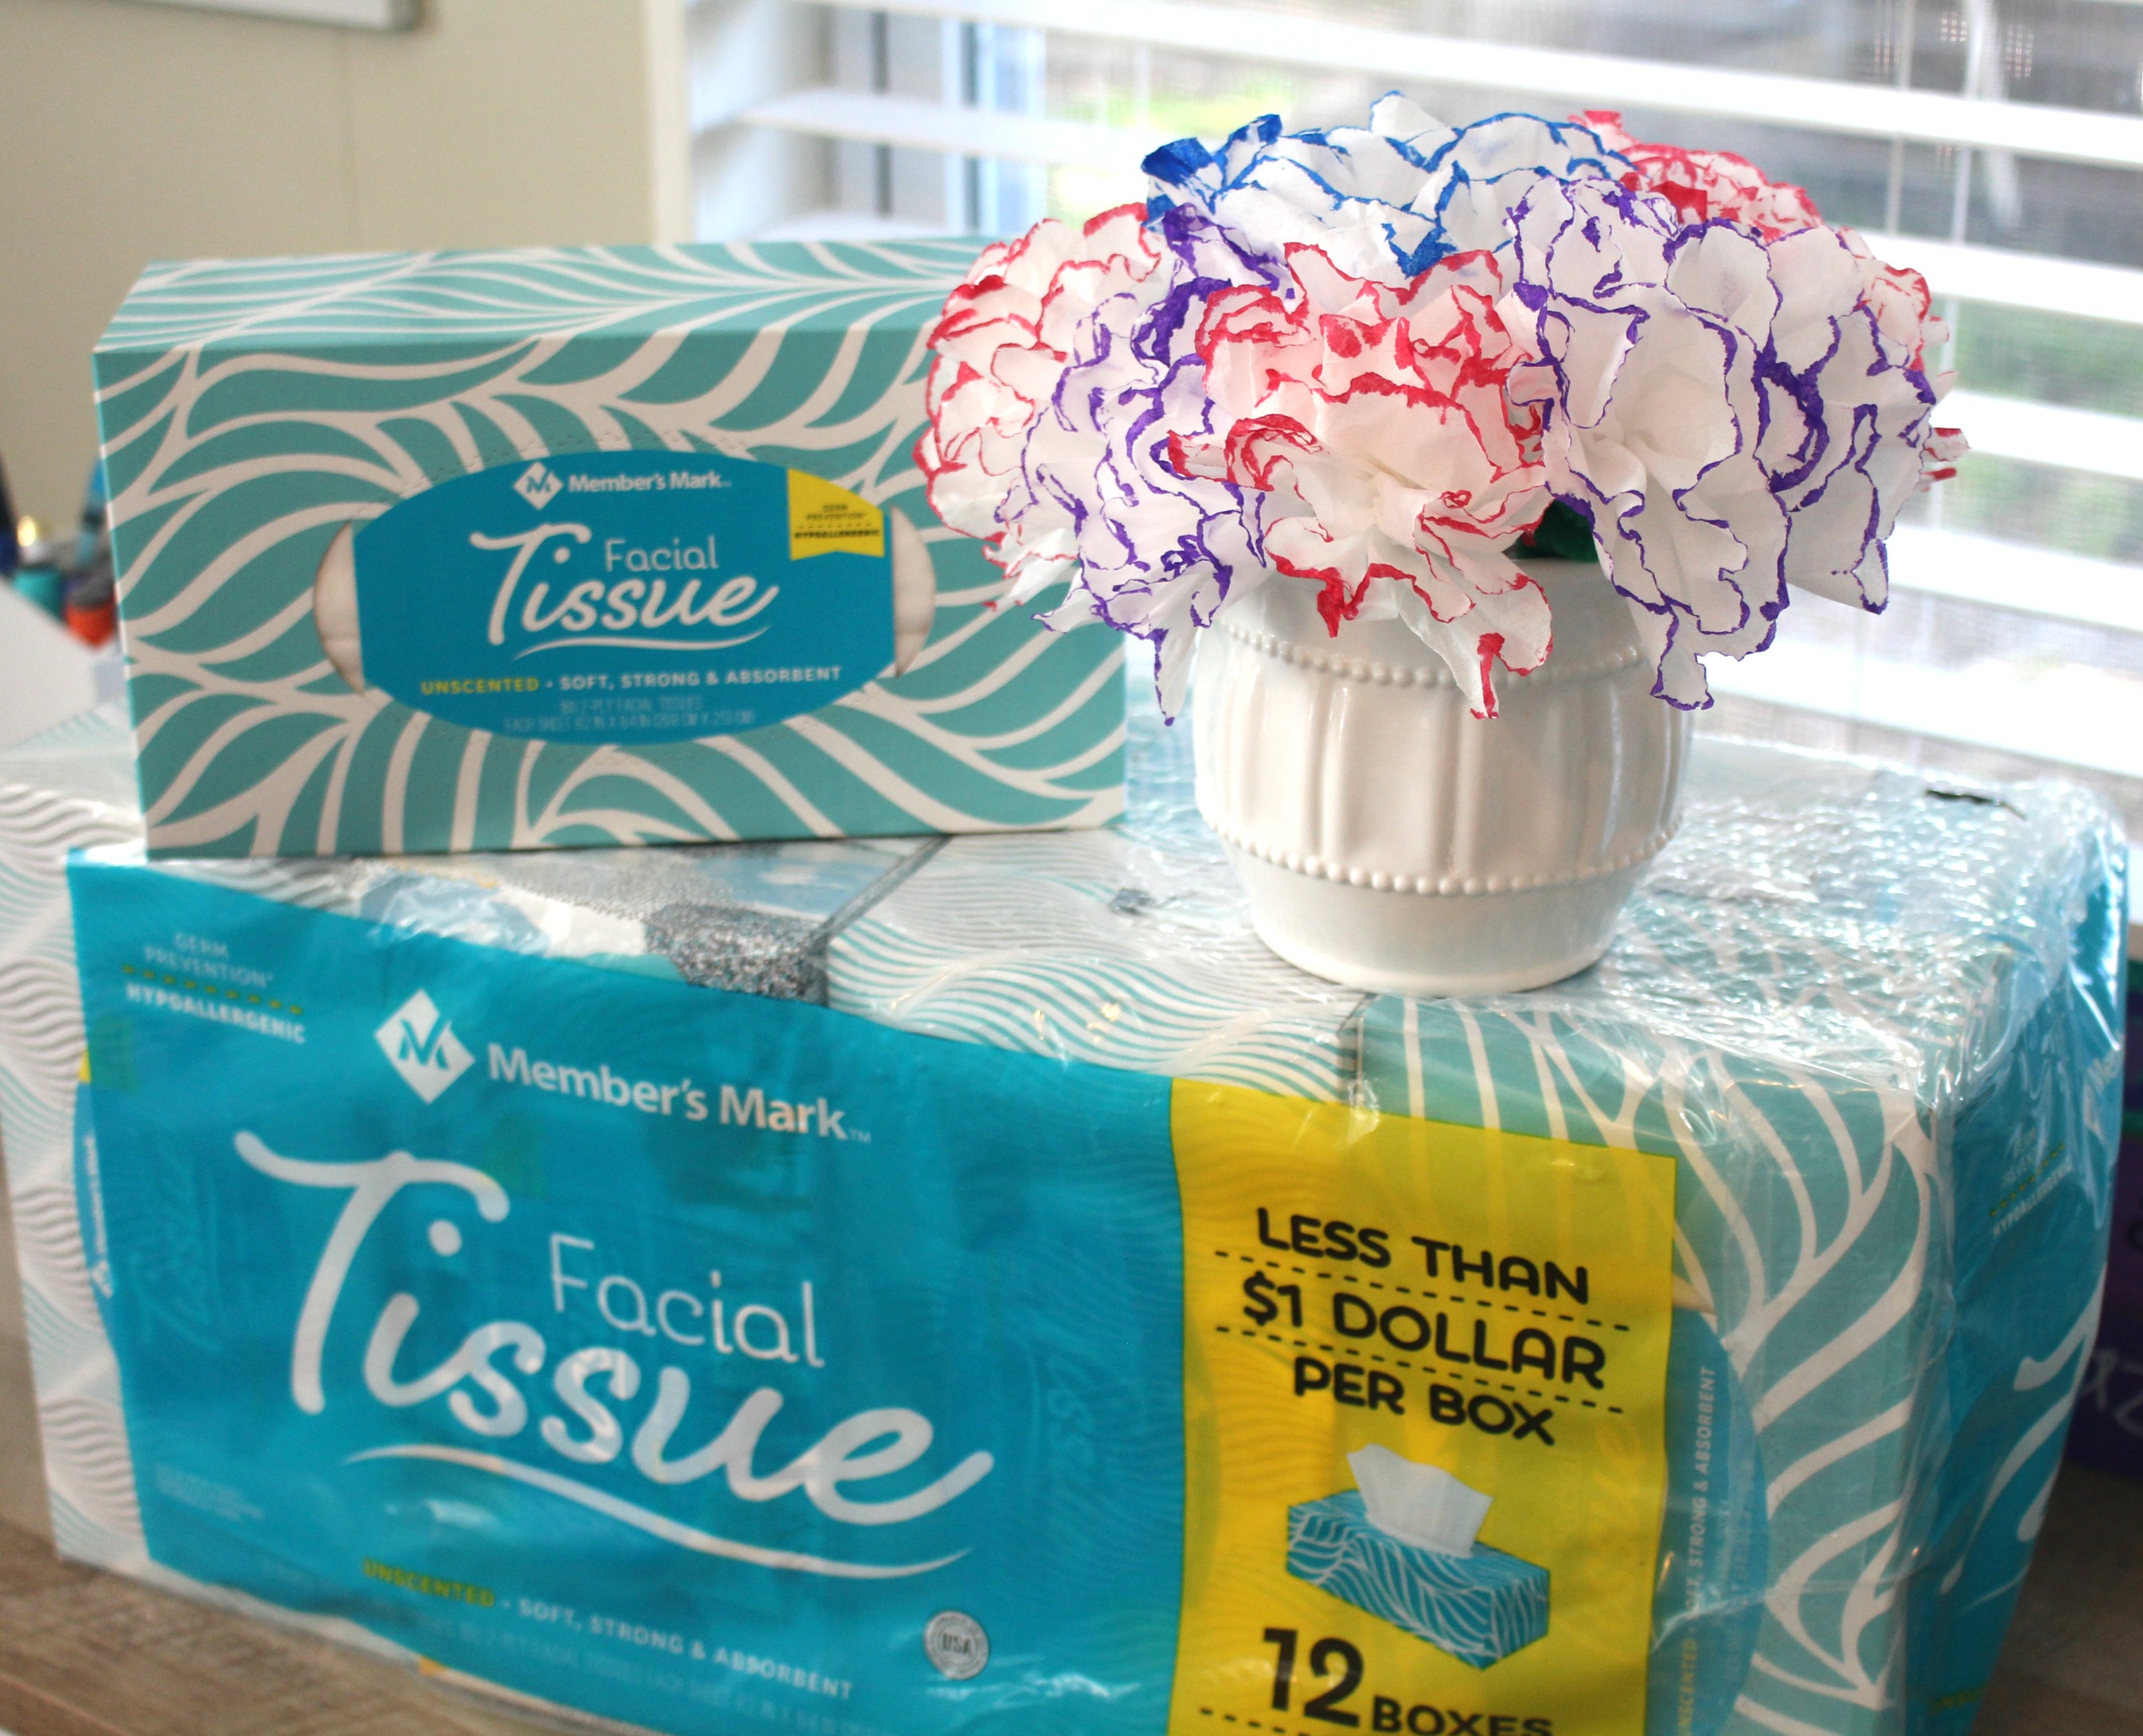 How to Make Tissue Flowers with Member’s Mark Brand Facial Tissues